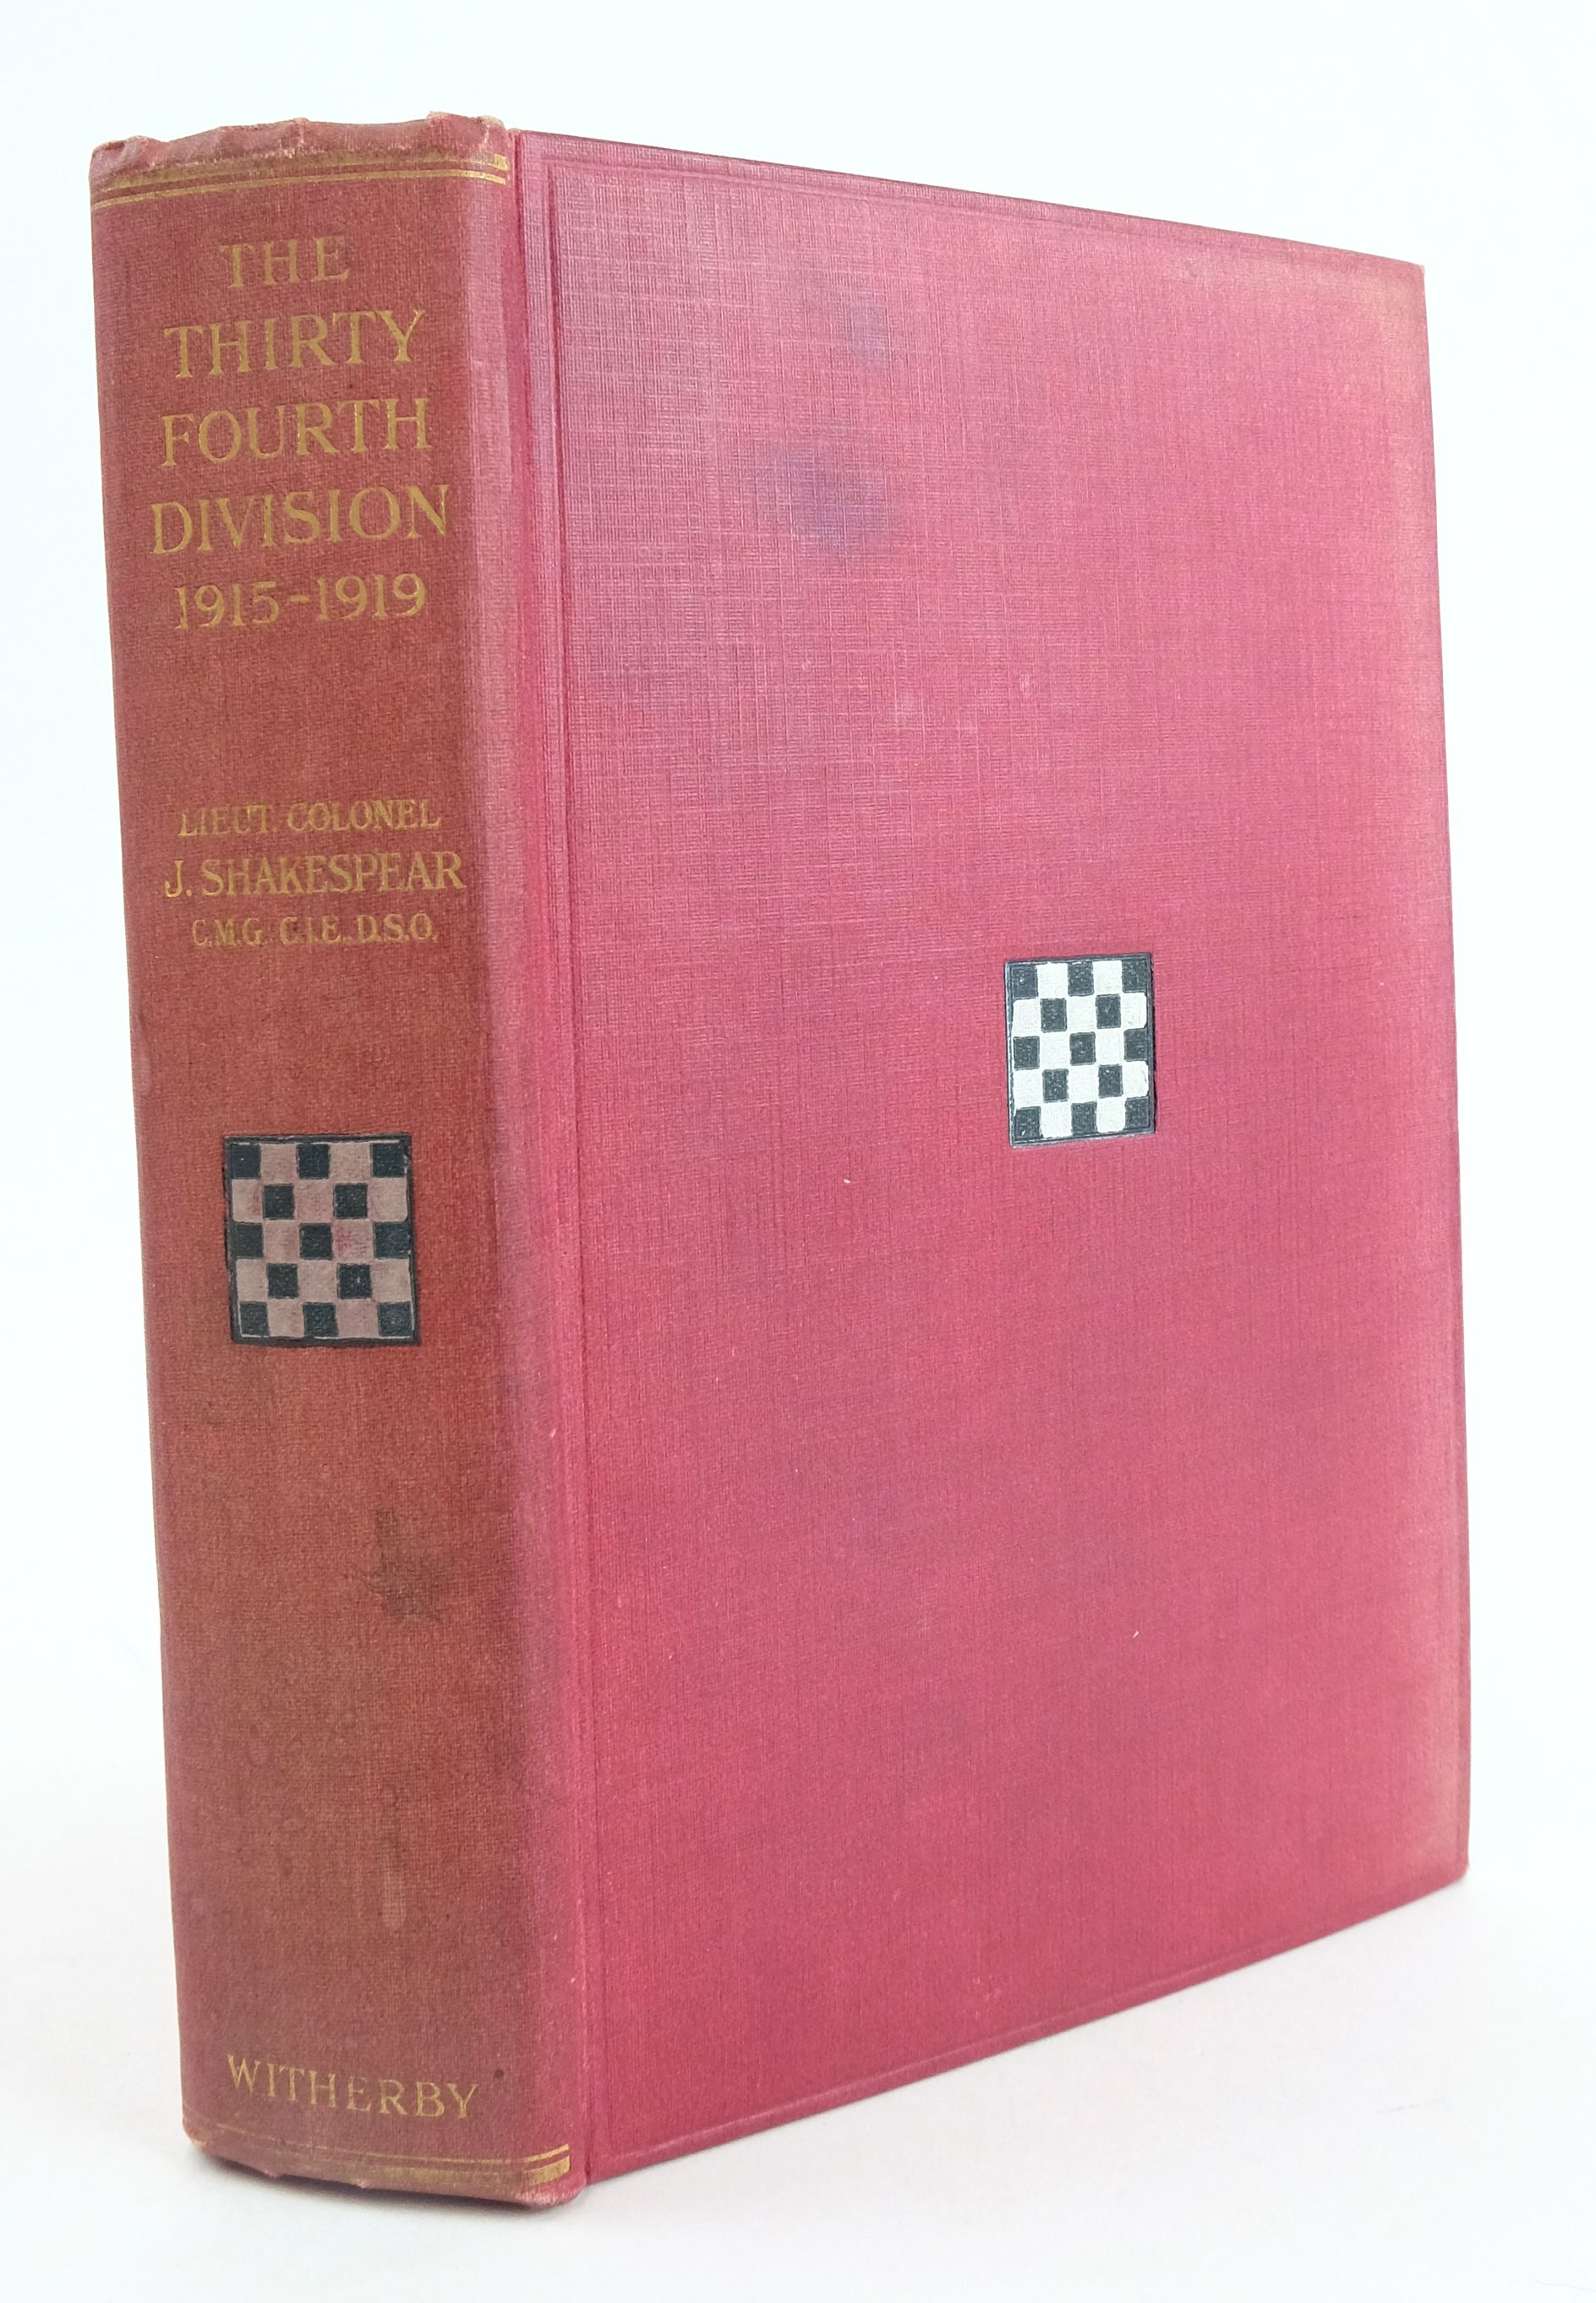 Photo of THE THIRTY-FOURTH DIVISION 1915-1919 written by Shakespear, Lt Col. published by H. F. &amp; G. Witherby (STOCK CODE: 1824304)  for sale by Stella & Rose's Books